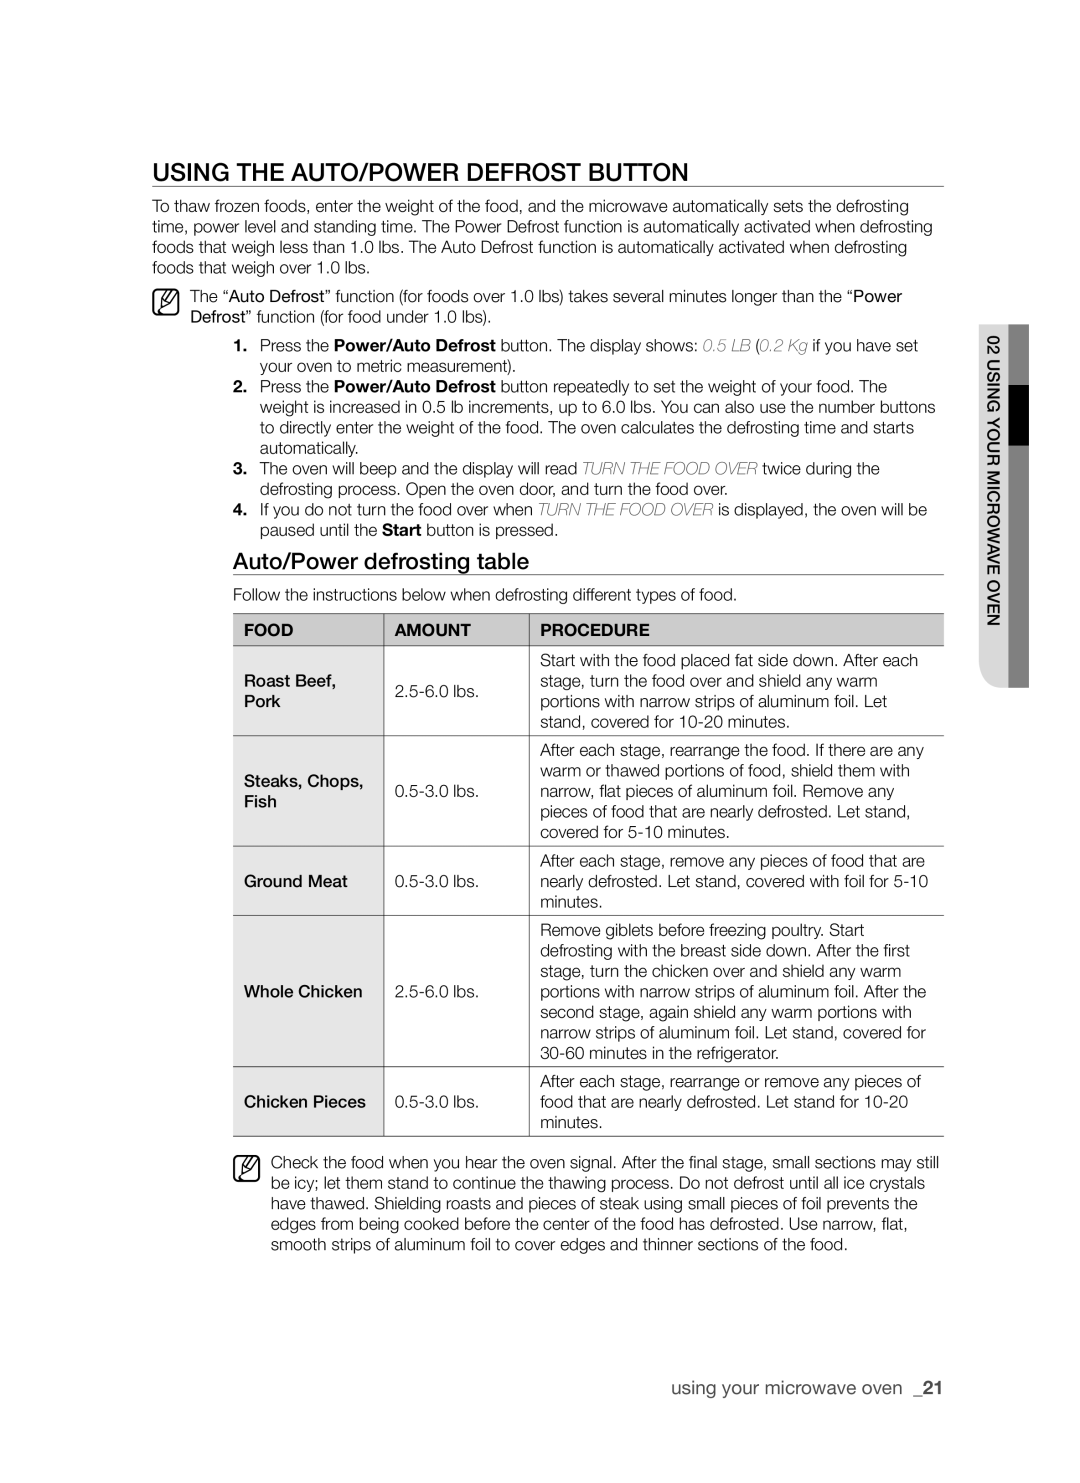 Samsung SMH7185 user manual Using the Auto/Power Defrost button, Auto/Power defrosting table, using your microwave oven 